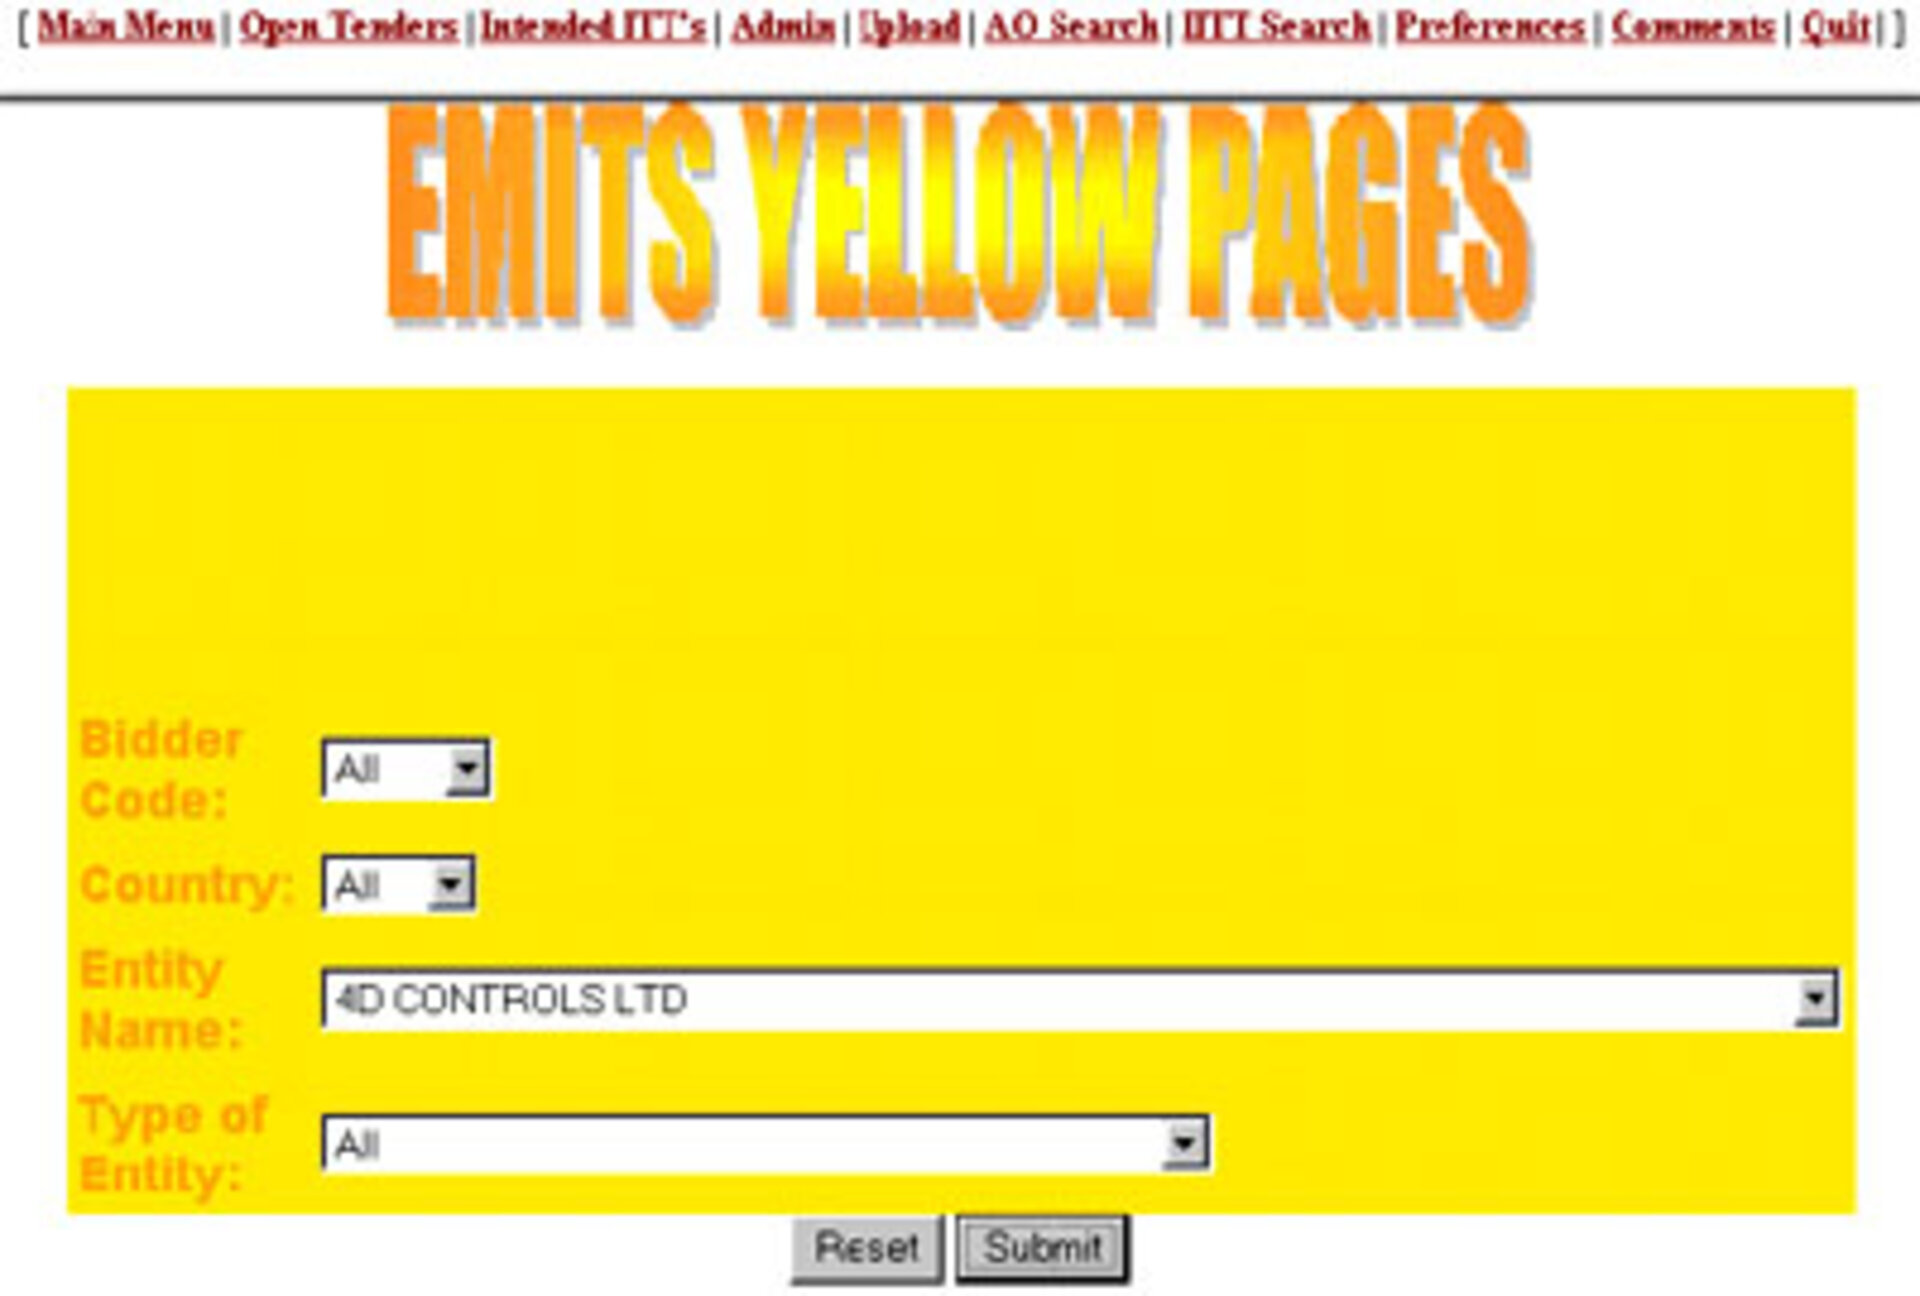 Emits - Yellow Pages